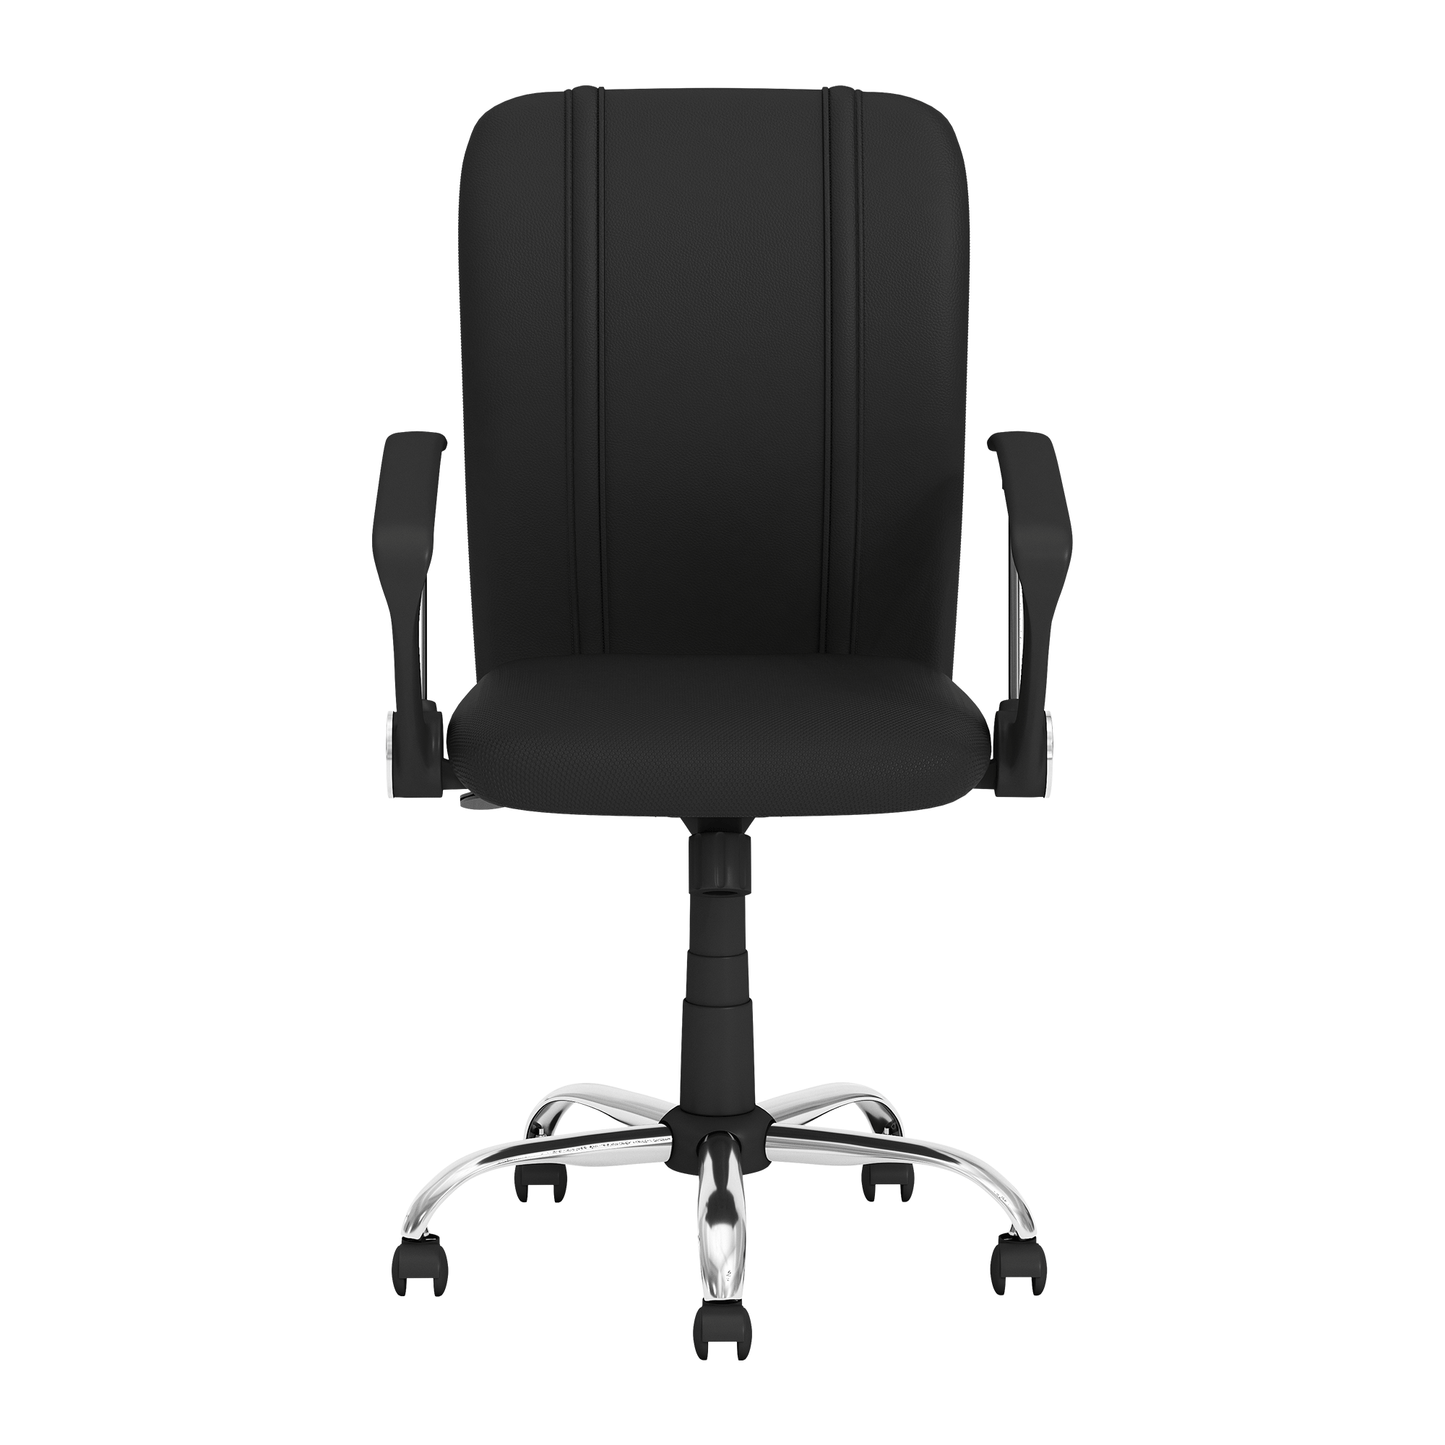 Curve Task Chair with Ball State Cardinals